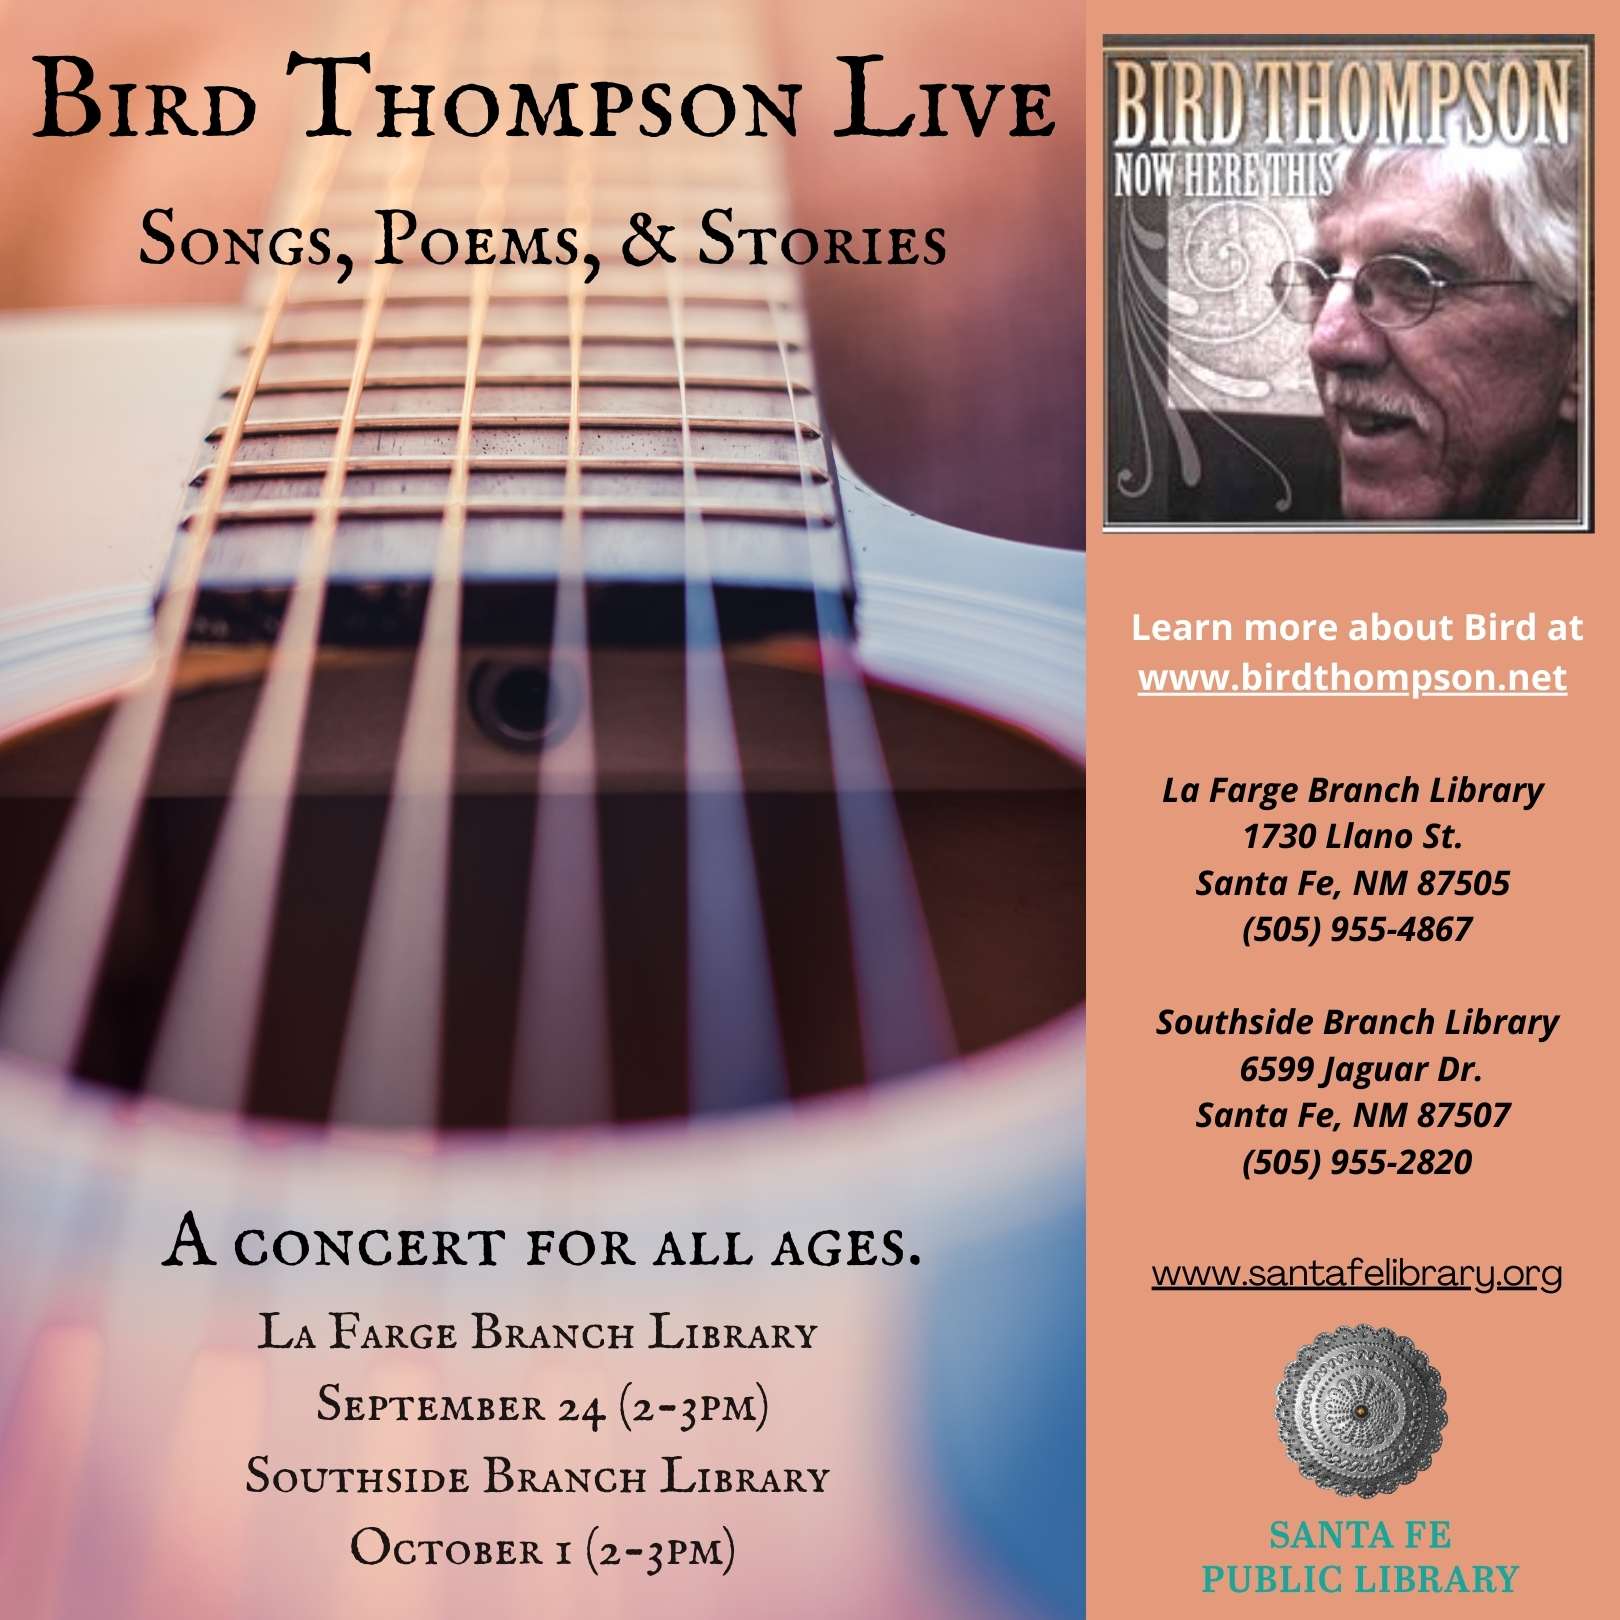 Bird Thompson Live: Songs, Poems and Stories